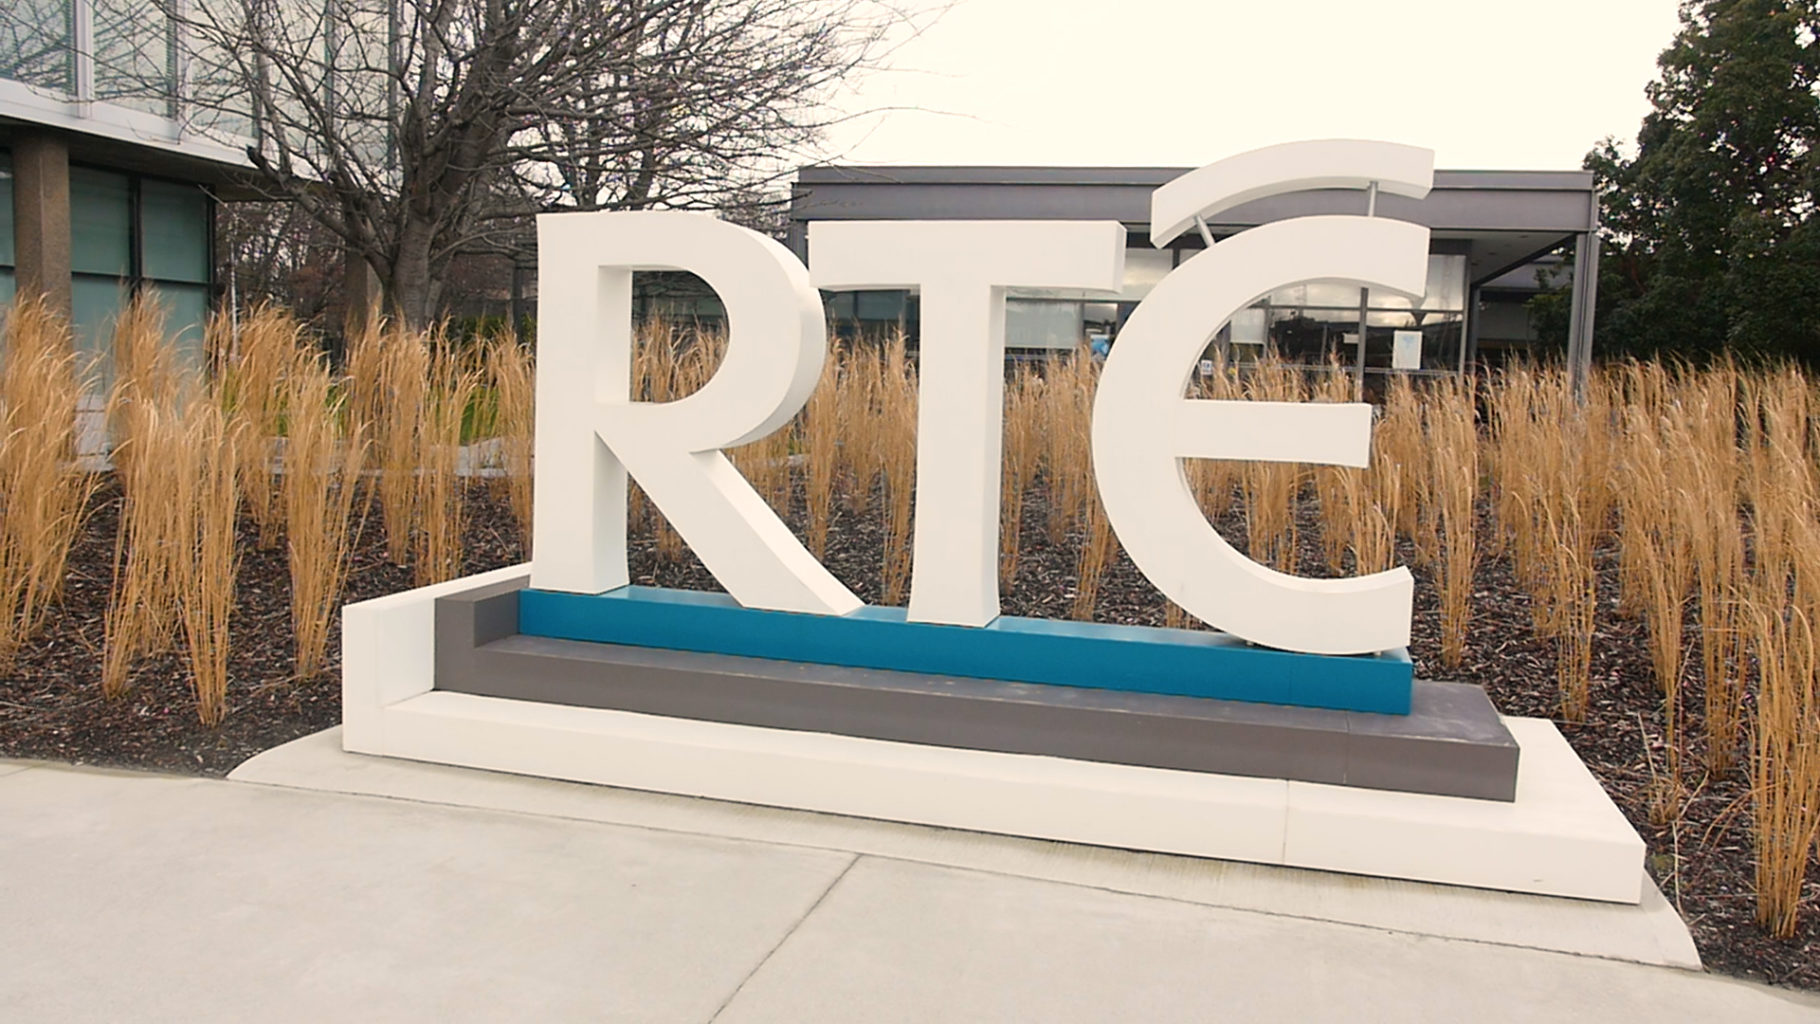 Image of a large RTE sign at their HQ